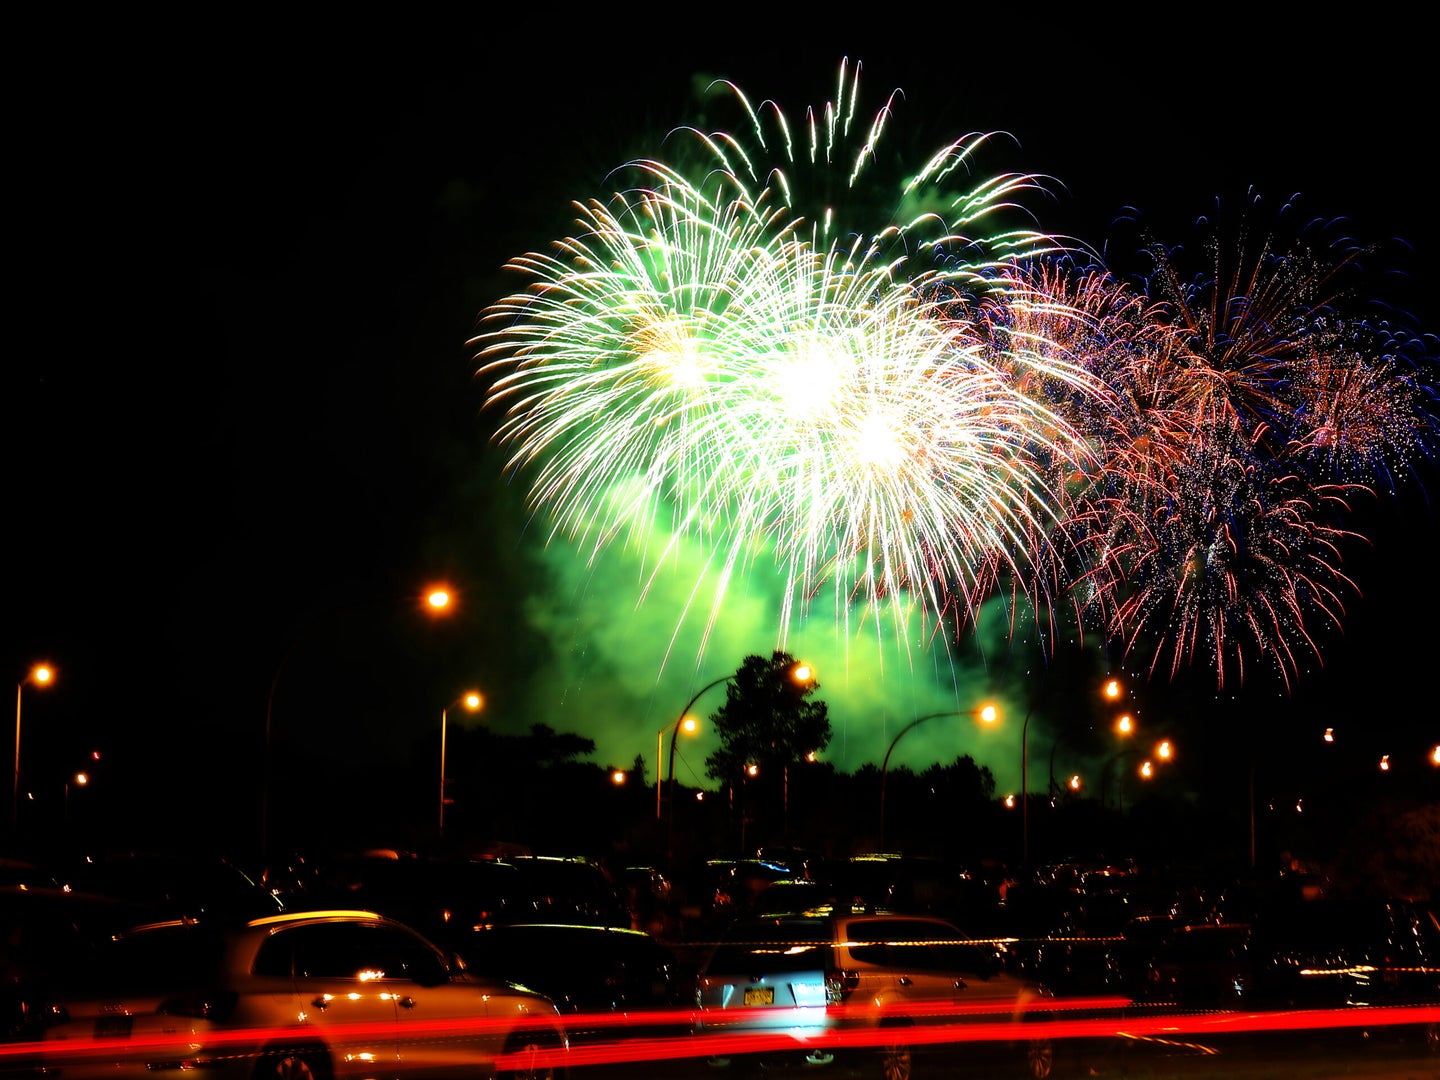 tips for photographing fireworks